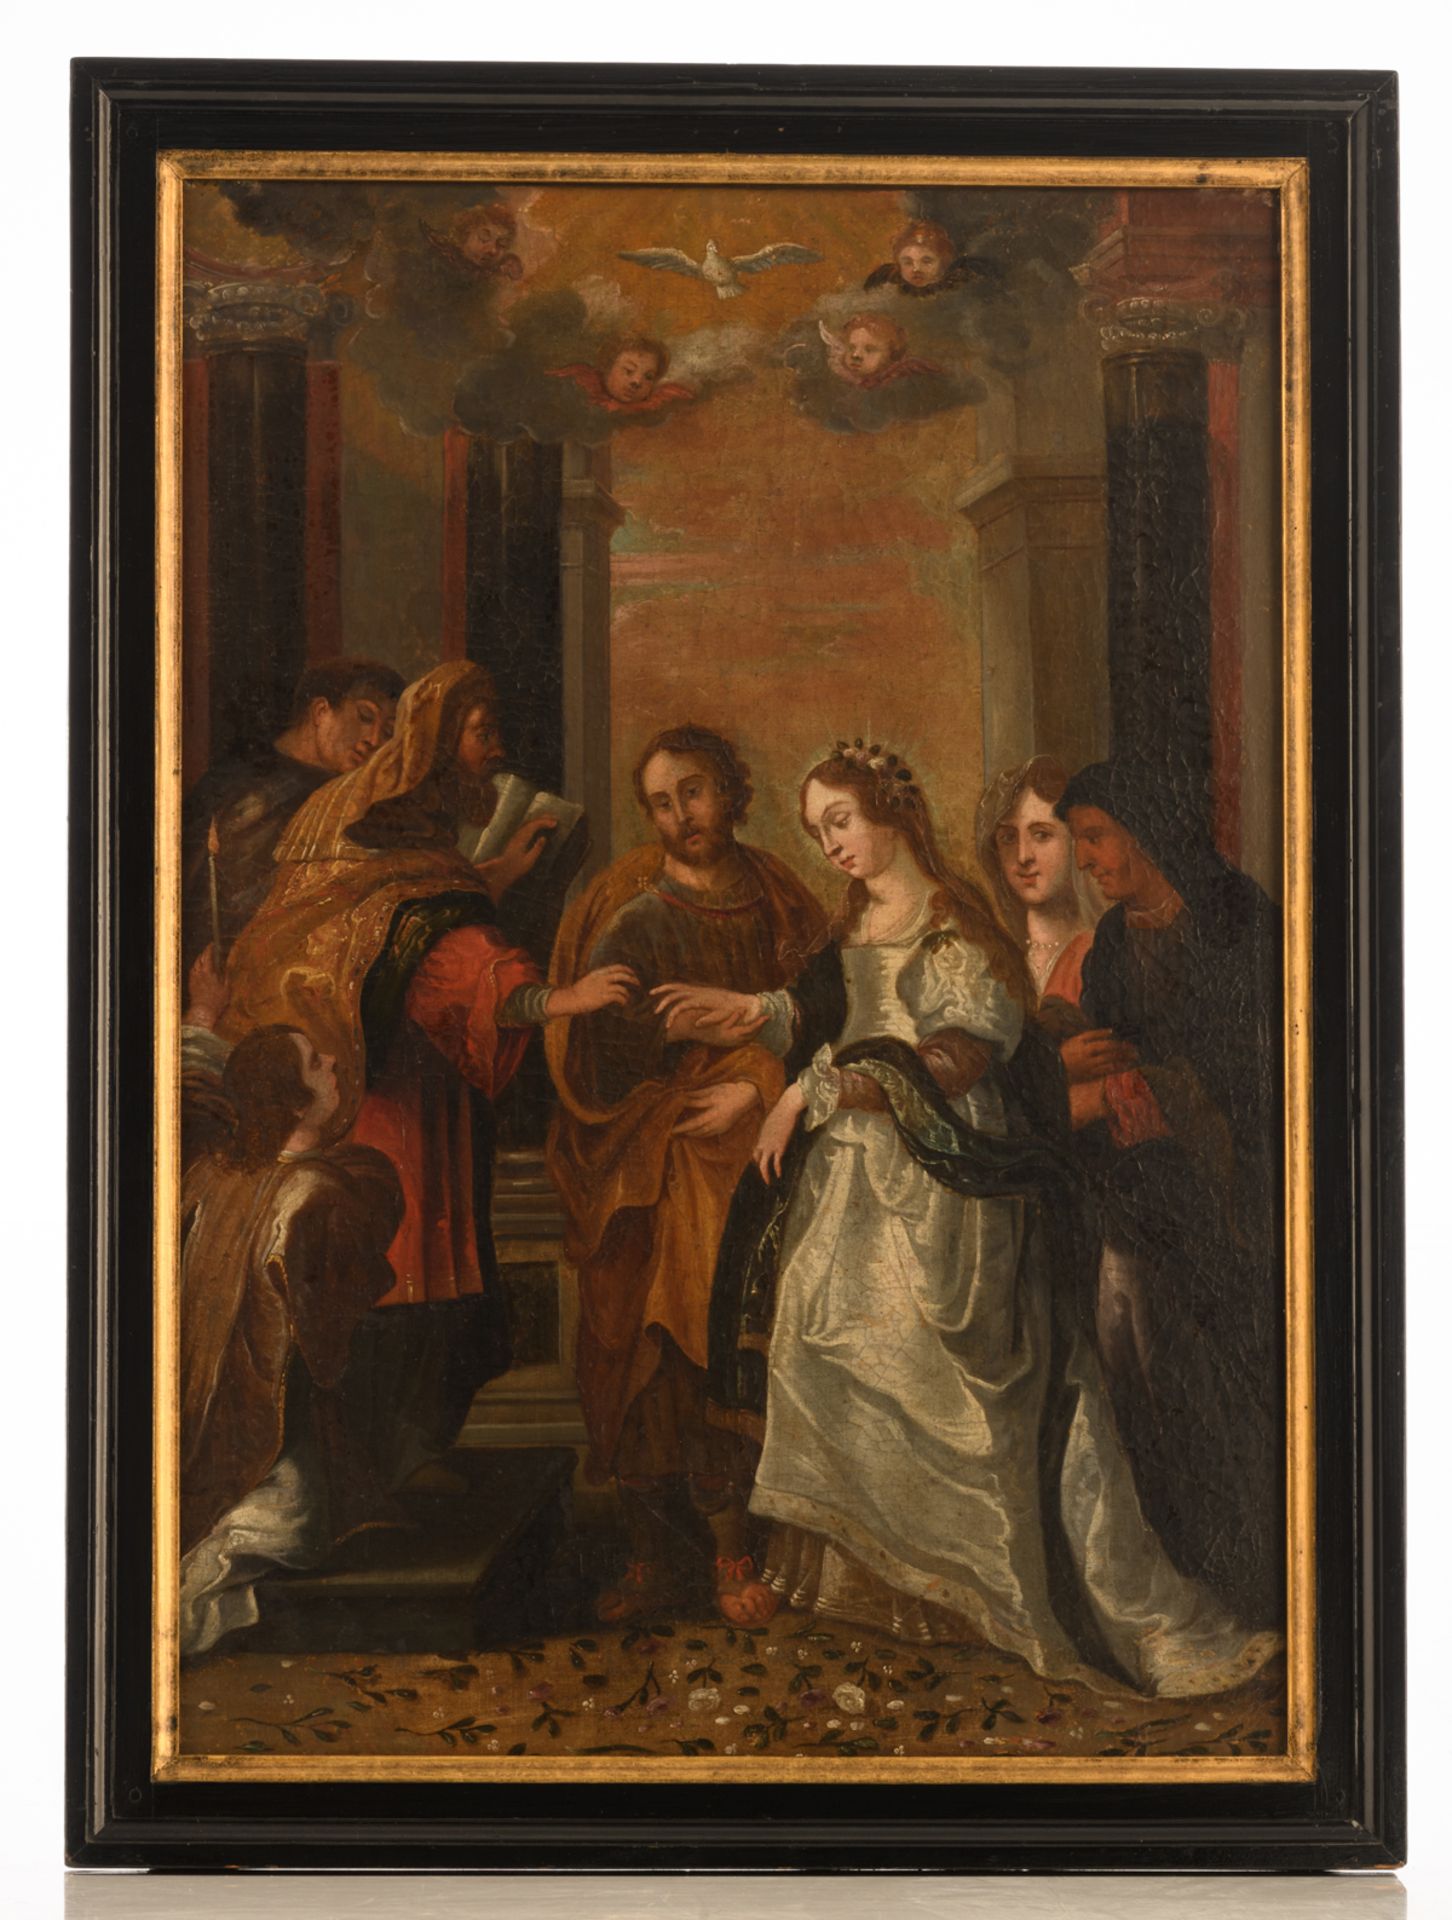 No visible signature, the wedding of the Holy Mary and Saint Joseph, oil on canvas, 17th/18thC, form - Image 2 of 3